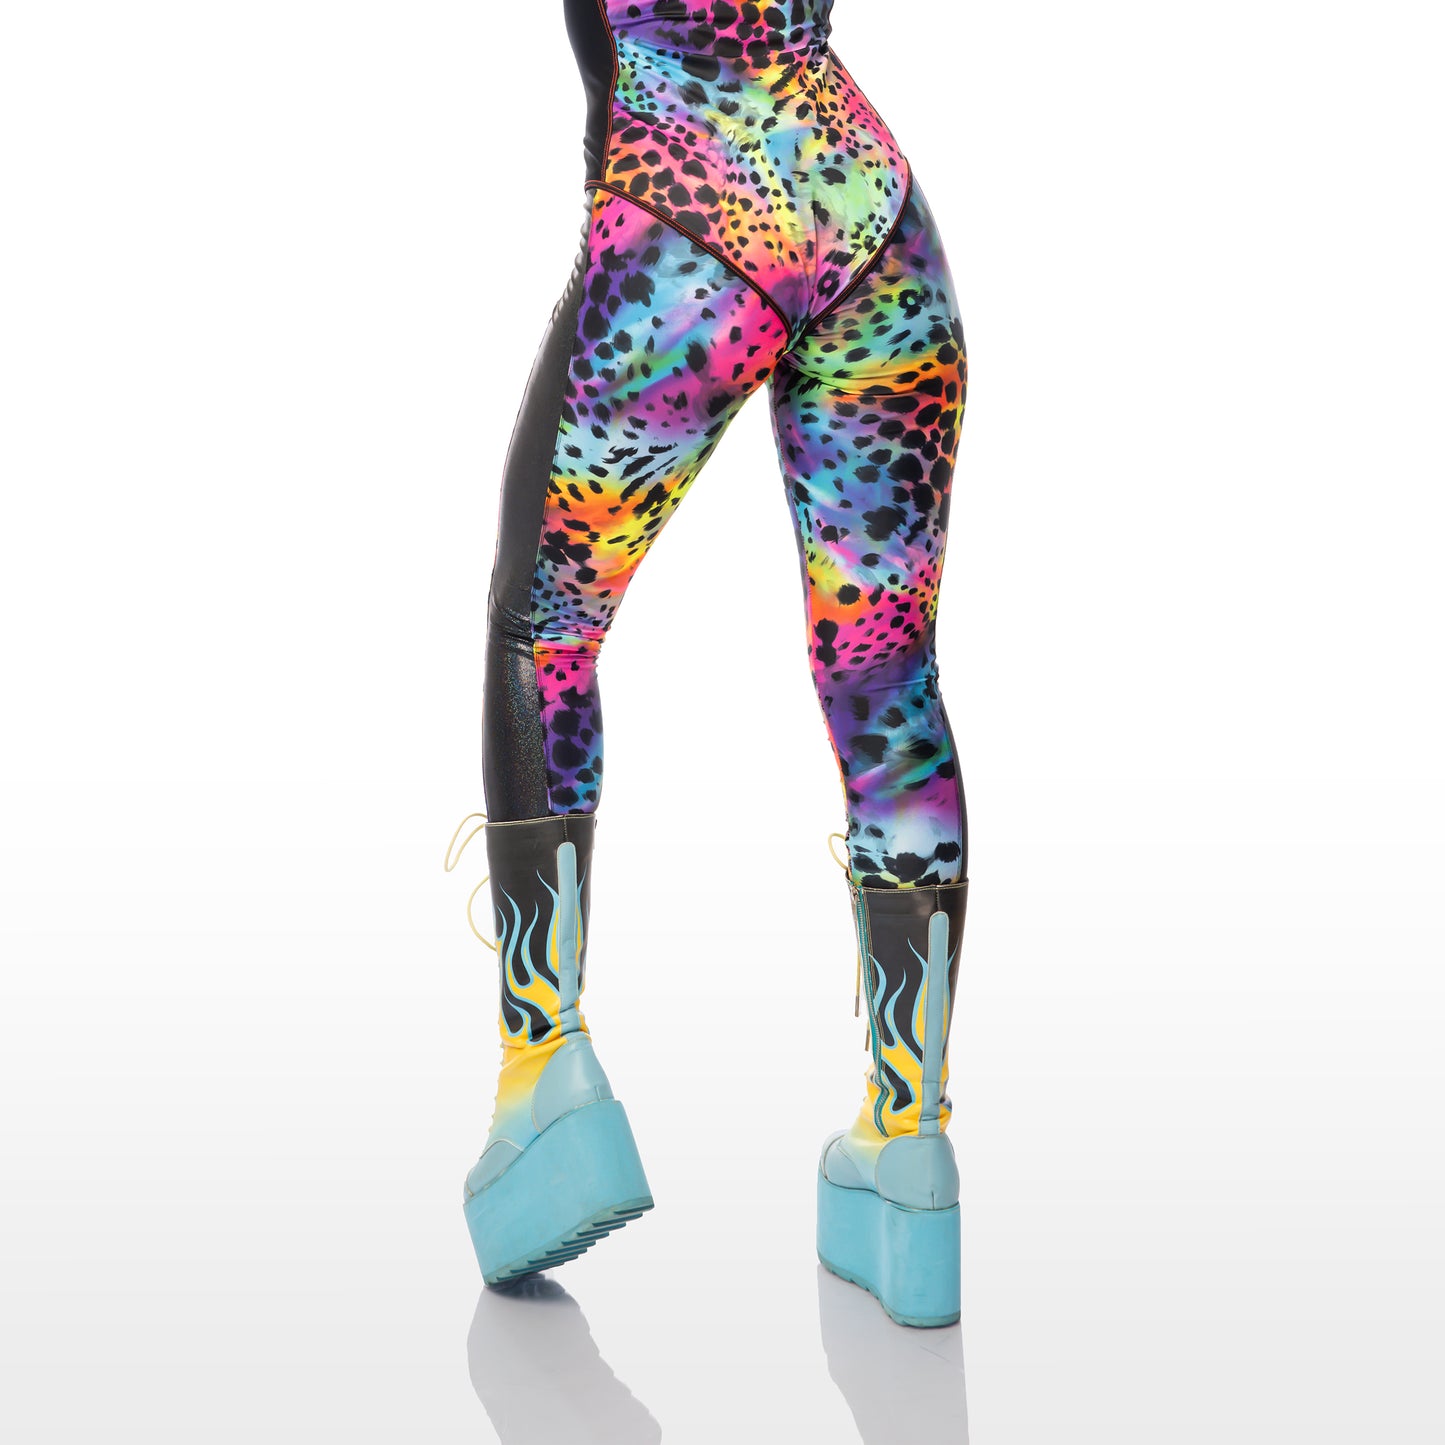 Techno Leopard Leggings in rainbow snowcat and black holographic printed spandex. The unisex design features a high double waistband and full length black holographic foil side panels.